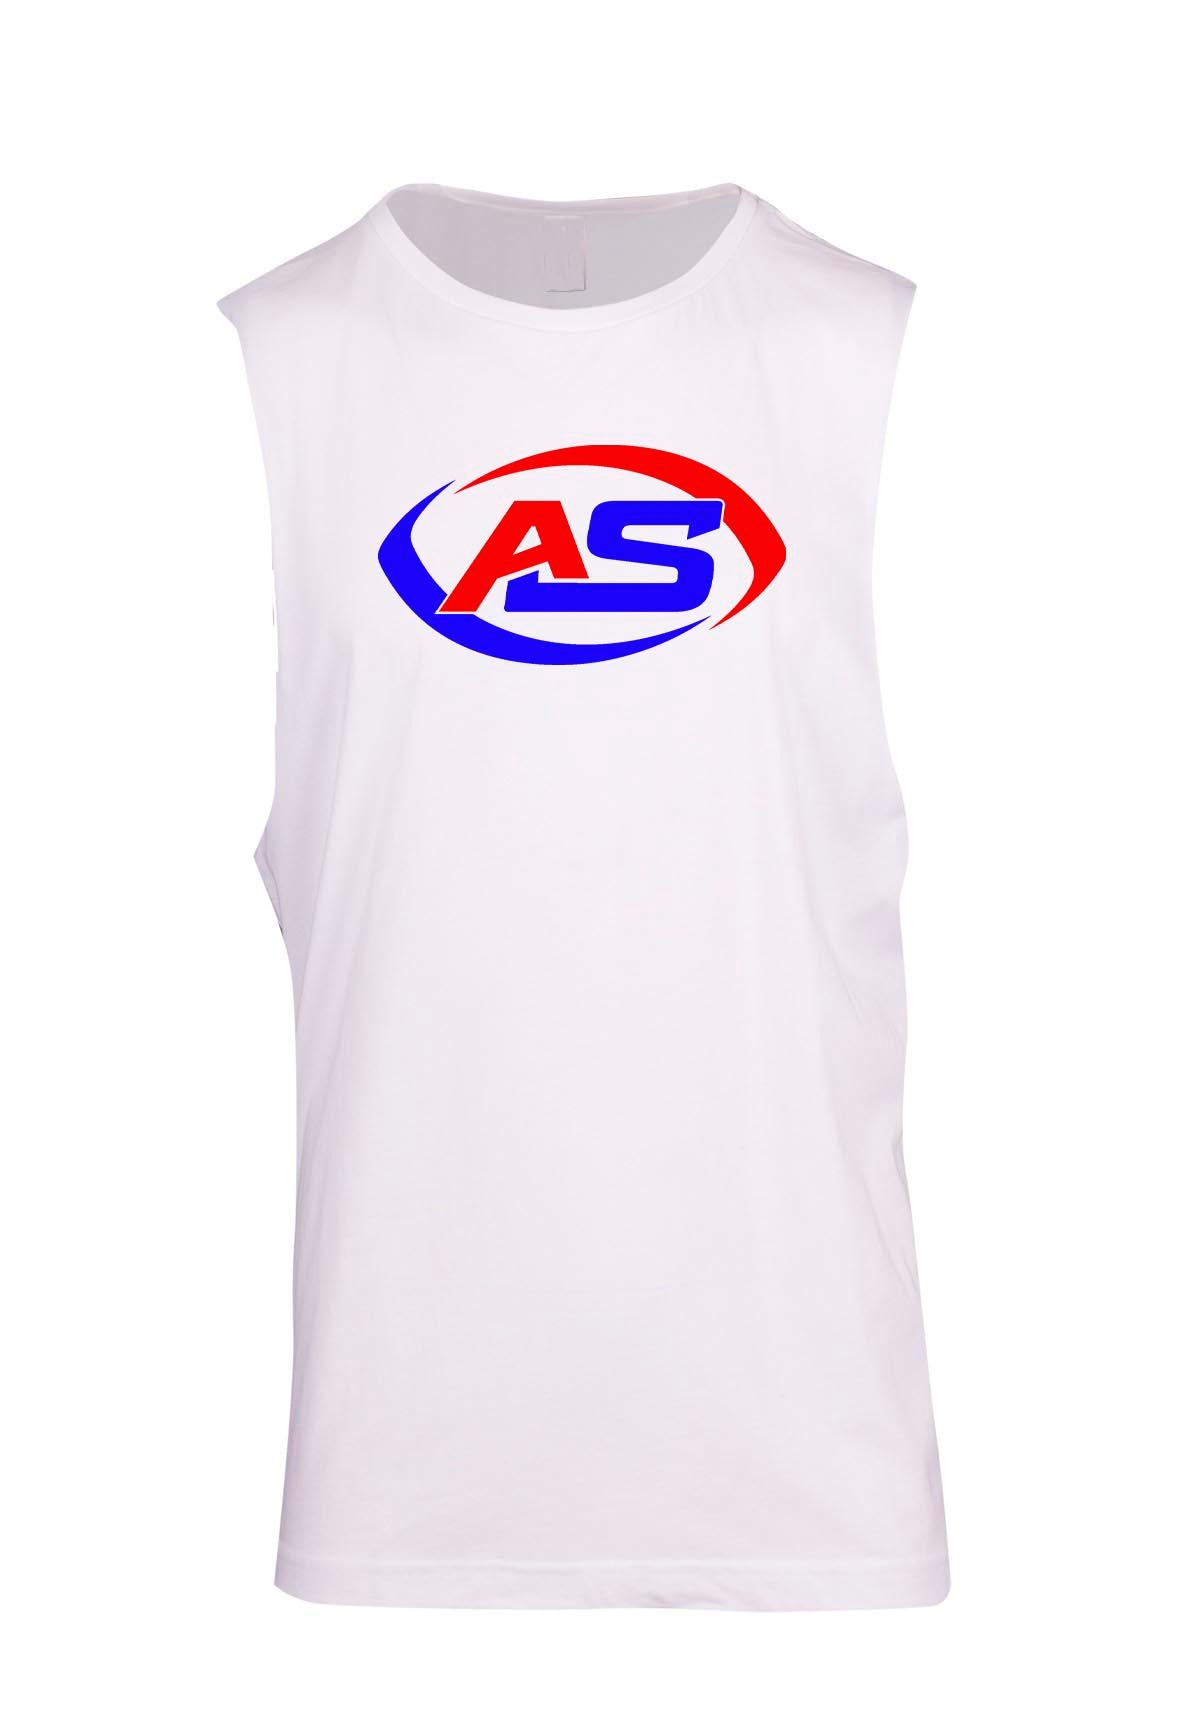 AS Activewear Muscle T-Shirt